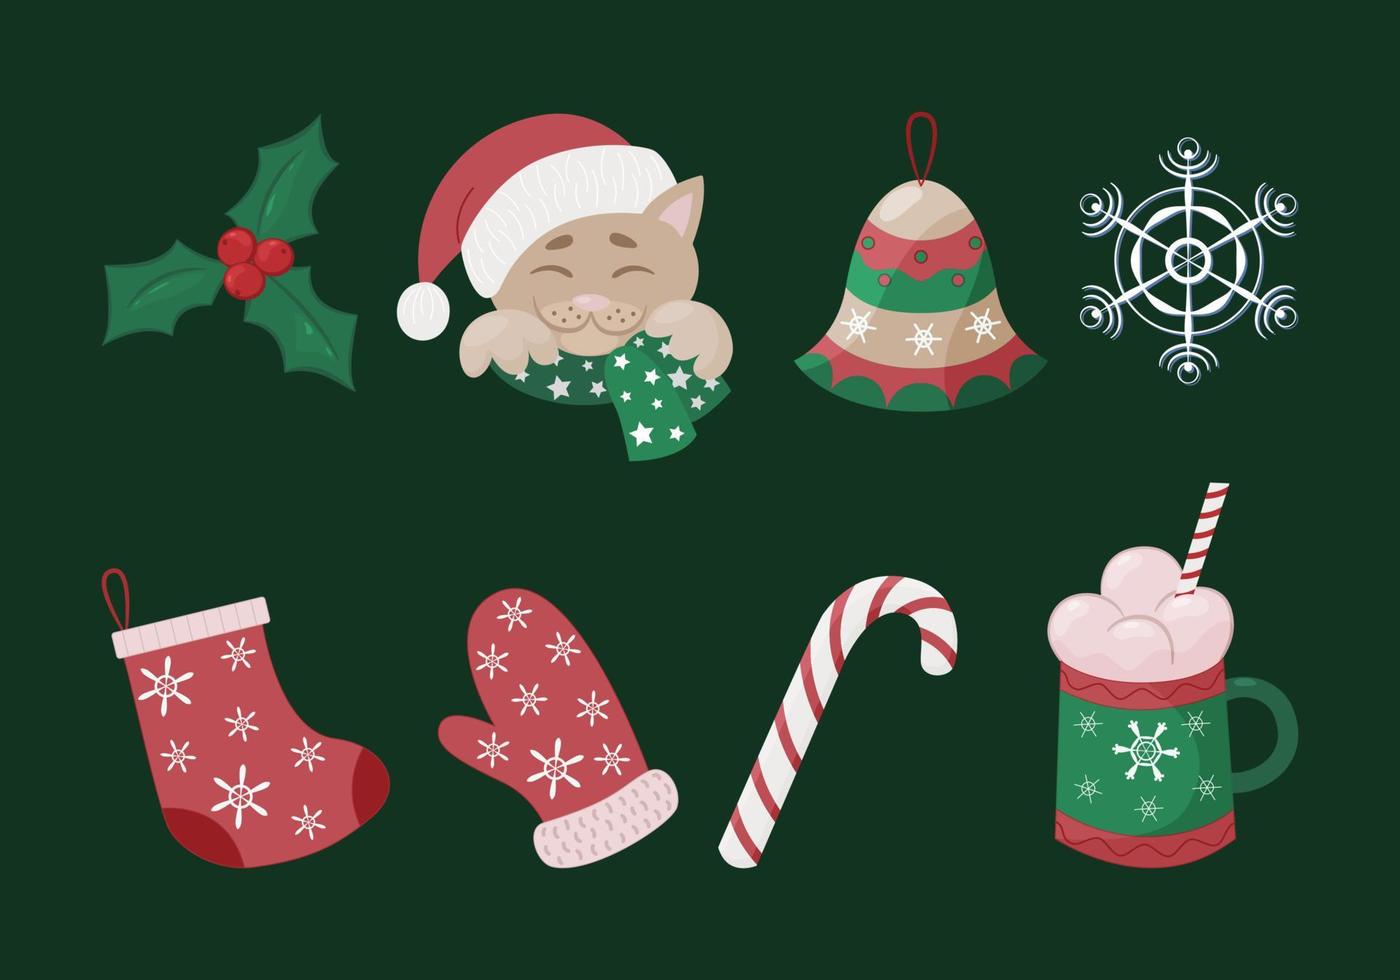 Set of Christmas cliparts. Bell, cat, lollipop, snowflake, sock, mitt, holly berry, mug with a drink. Cartoon style. Vector. vector